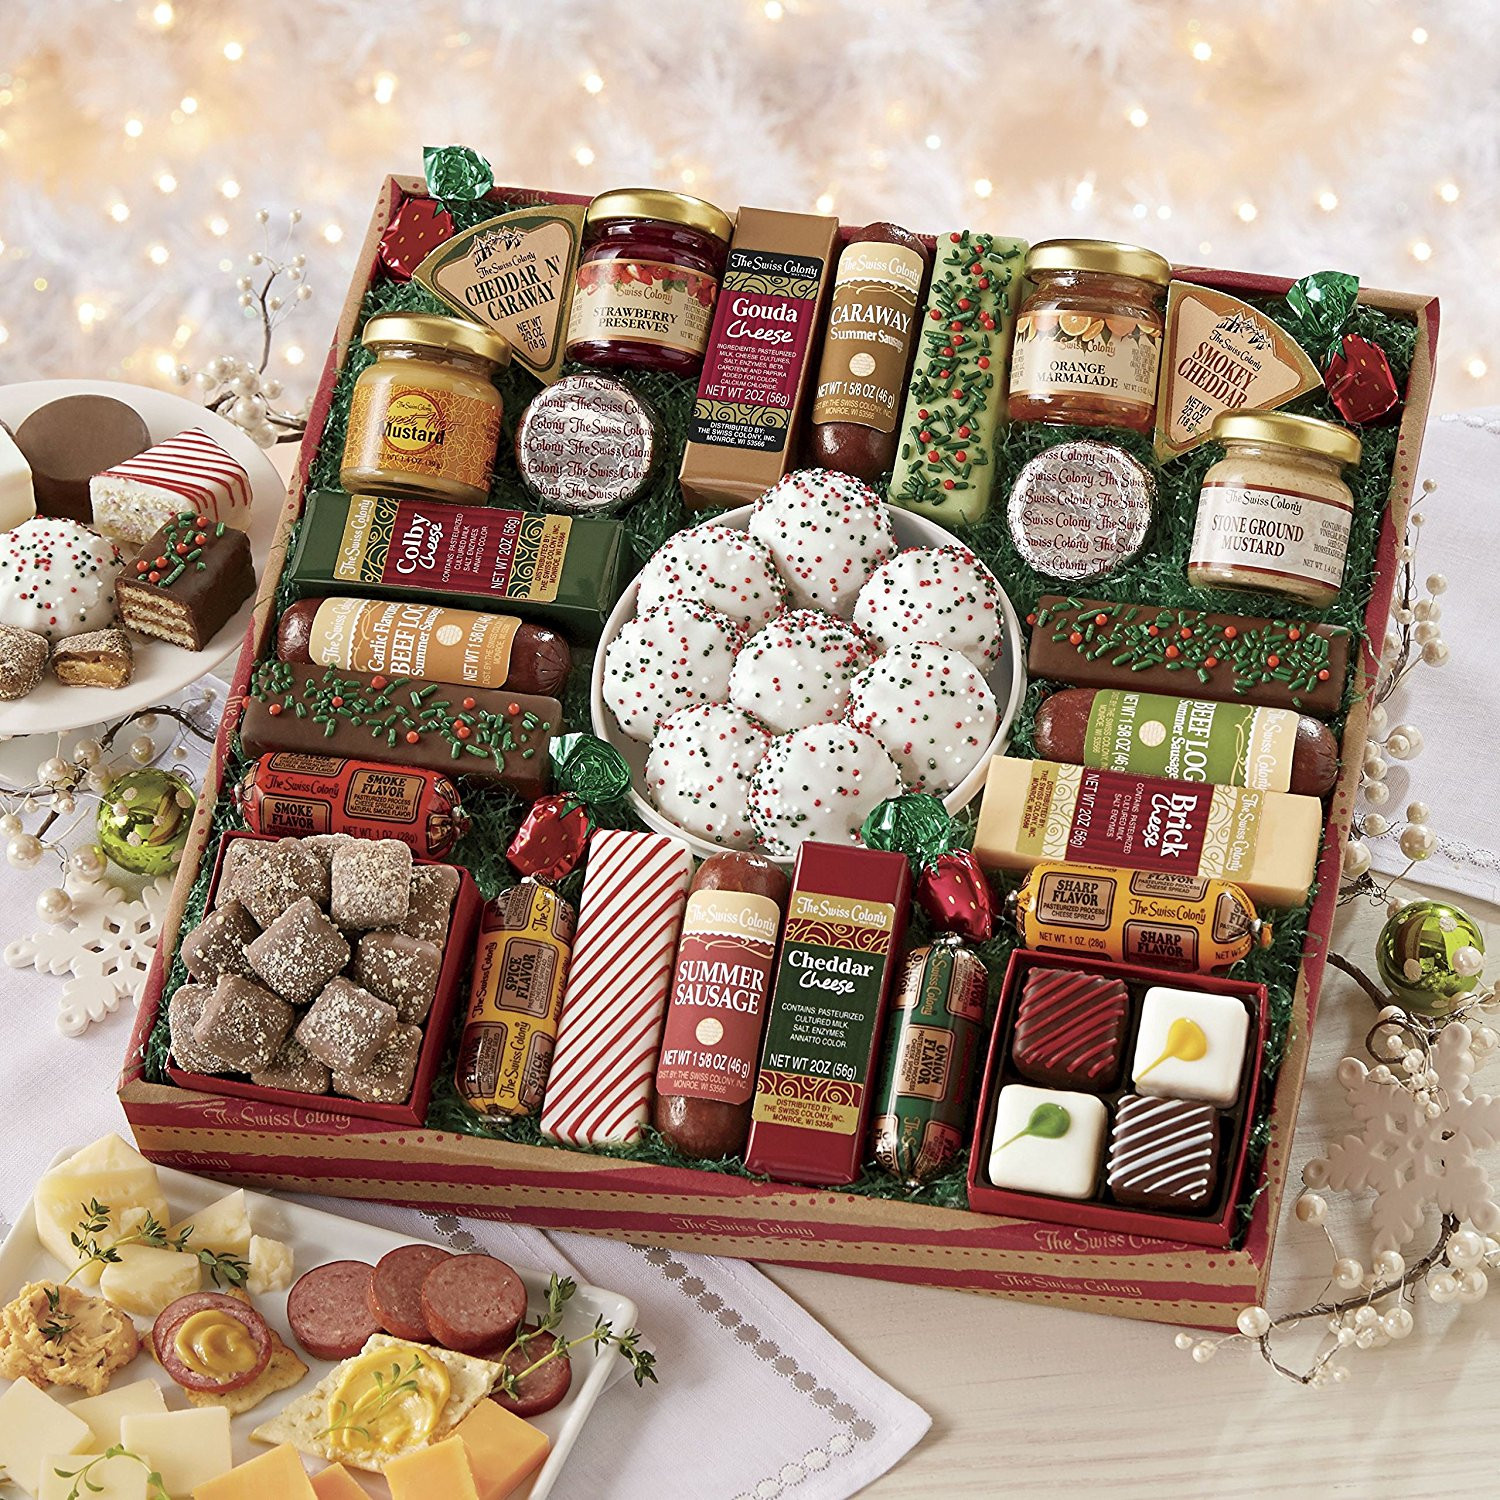 Snack Gift Basket Ideas
 Gourmet Food Gift Baskets Best Cheeses Sausages Meat